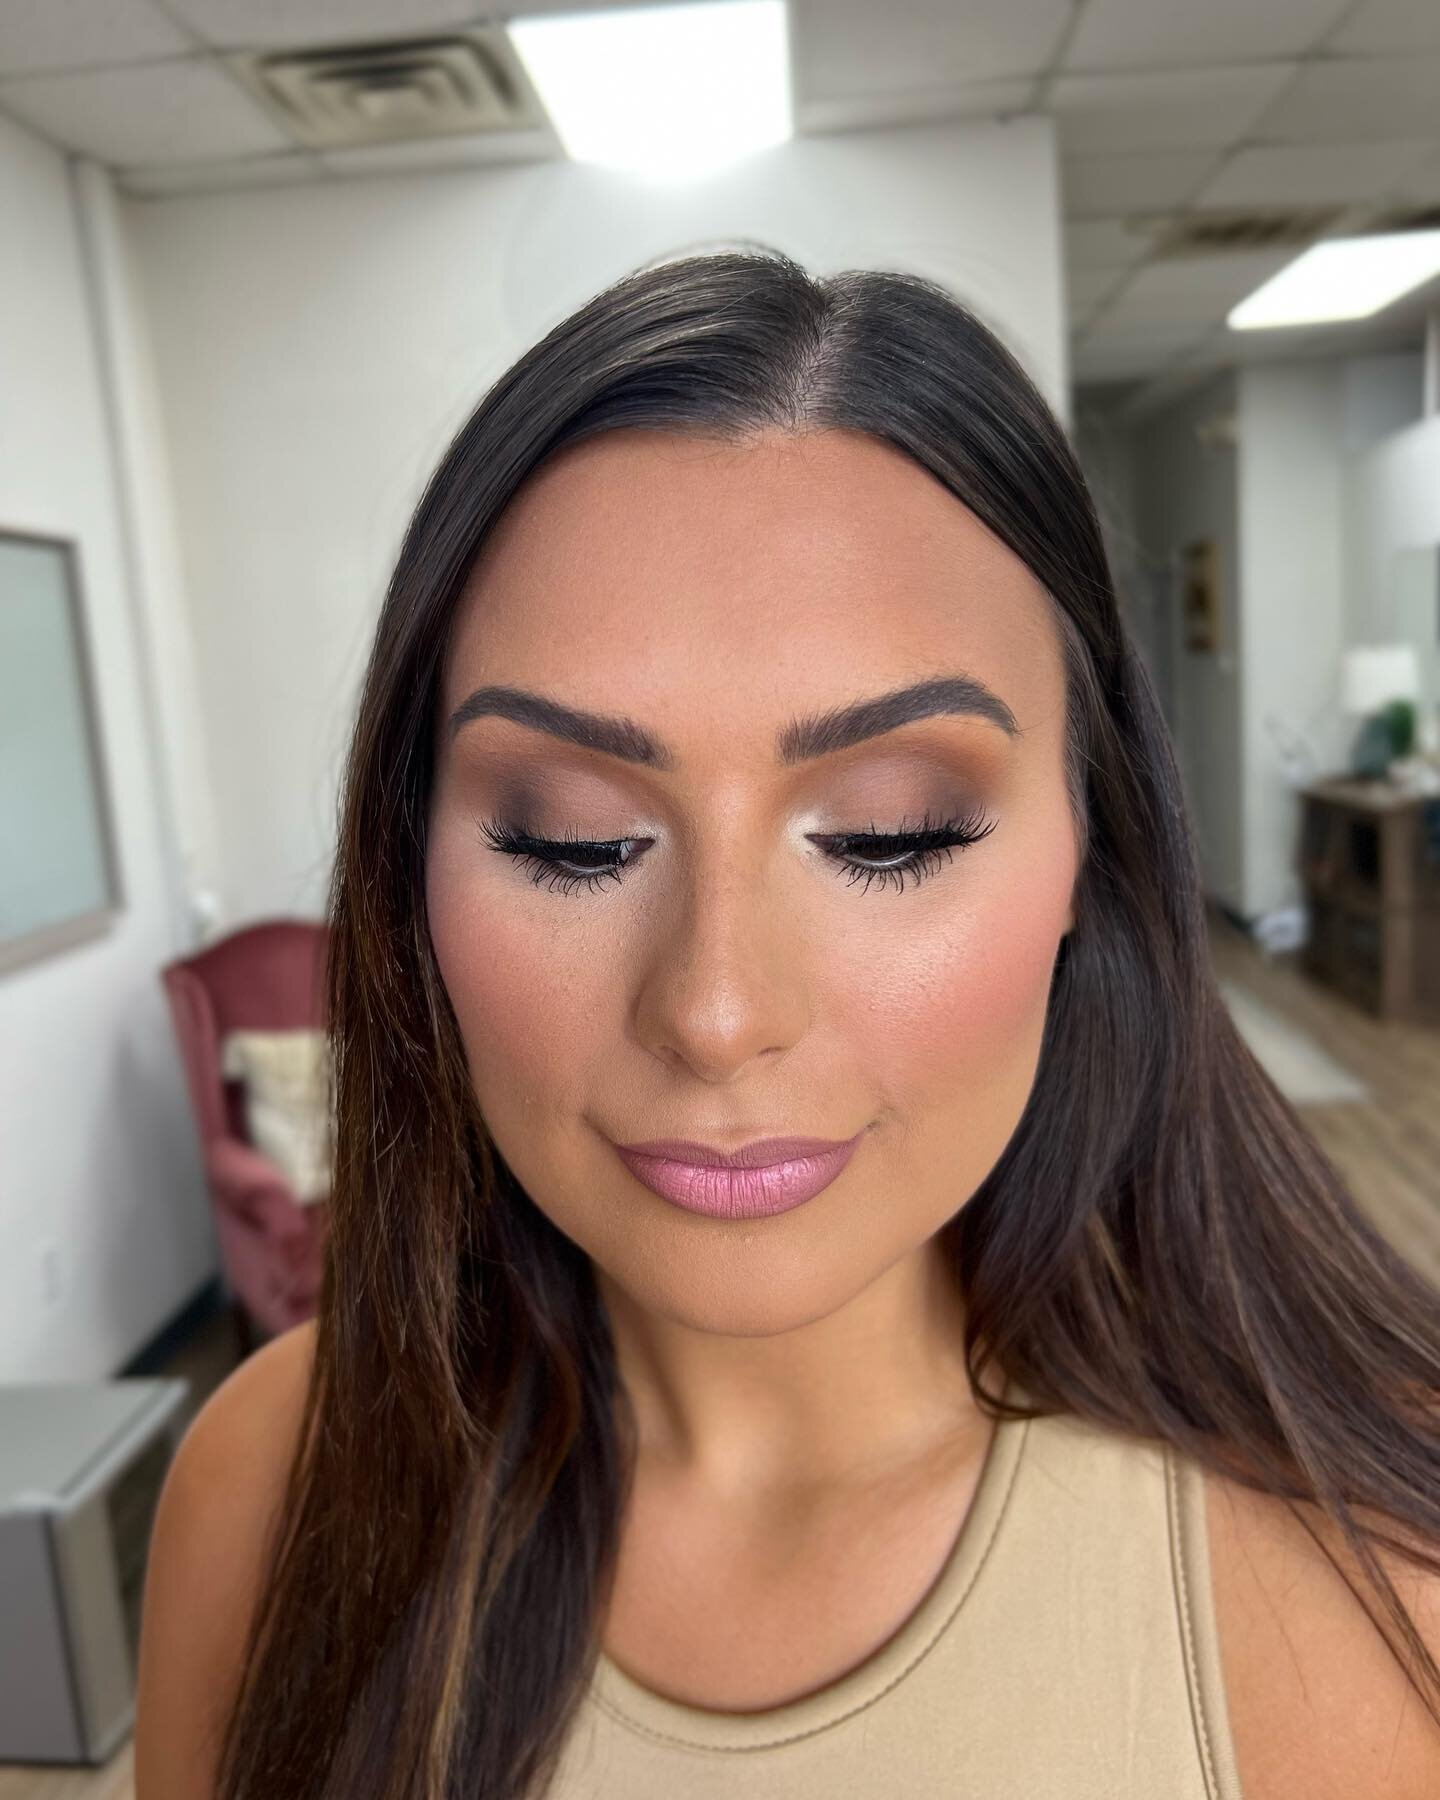 We love a dark smokey eye BIRTHDAY GLAM🤩

Don&rsquo;t forget we are now located at 16044 HWY 73, Prarieville, LA

Next to, NOT ON, Post office road and capital one!!